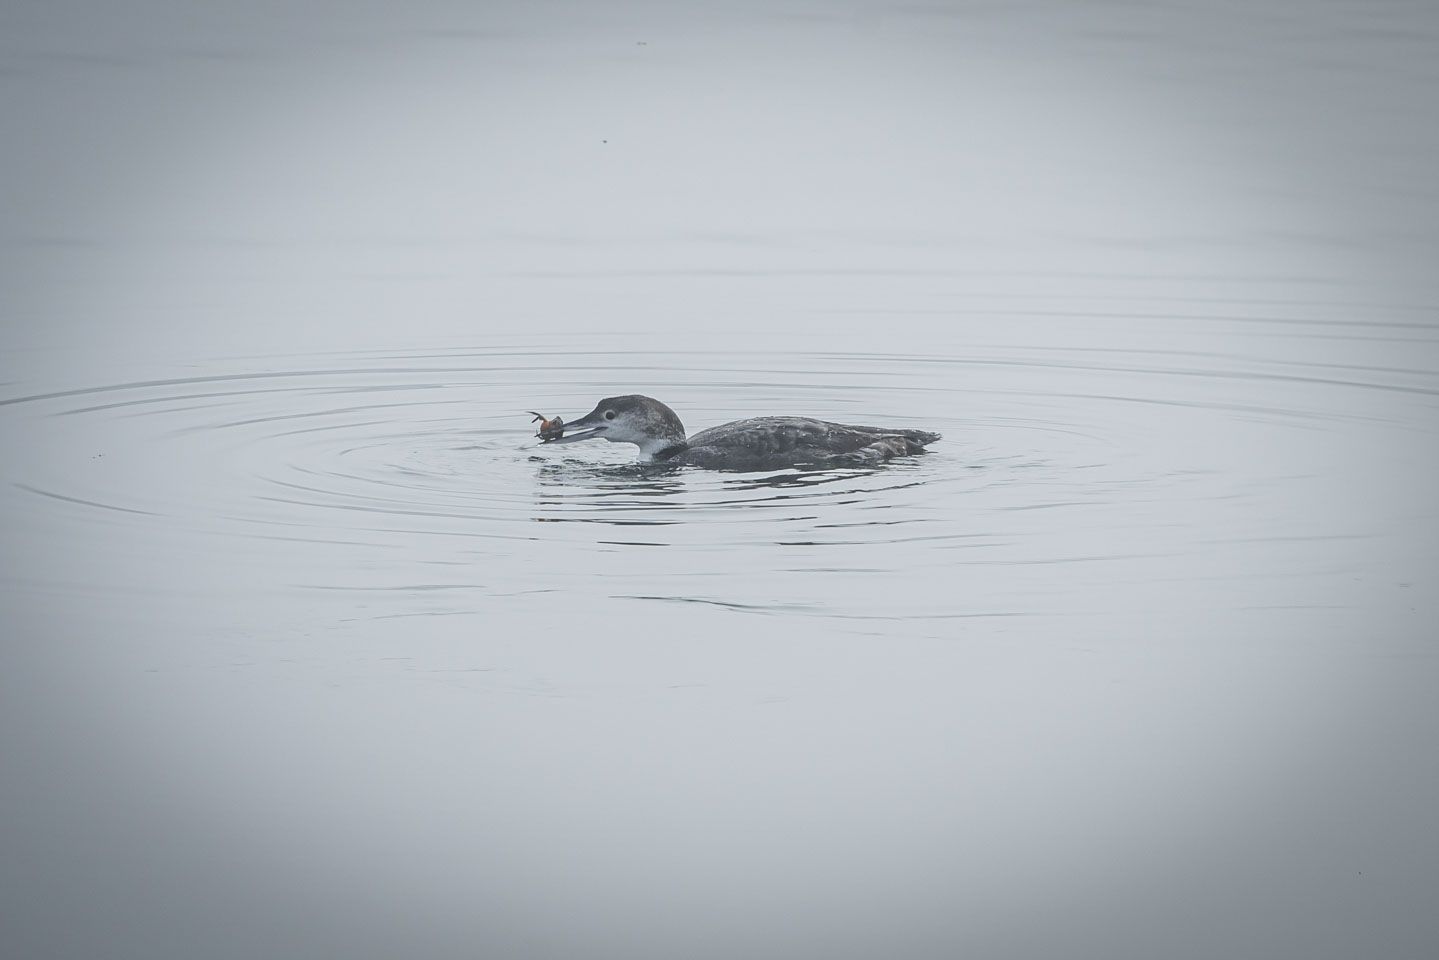 Female loon with a crab in its beak